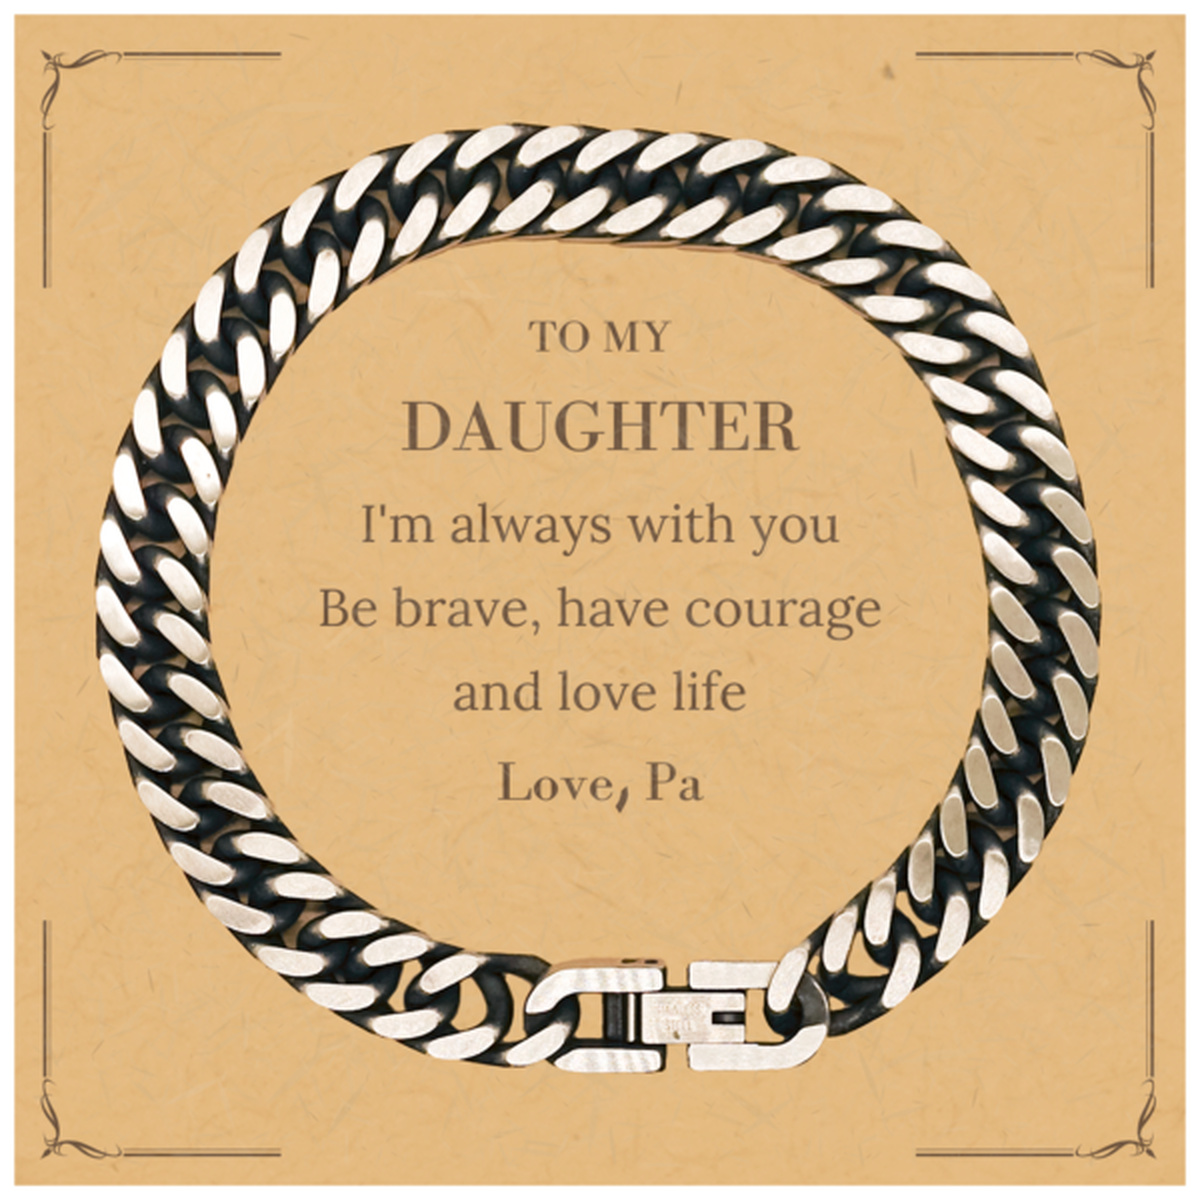 To My Daughter Gifts from Pa, Unique Cuban Link Chain Bracelet Inspirational Christmas Birthday Graduation Gifts for Daughter I'm always with you. Be brave, have courage and love life. Love, Pa